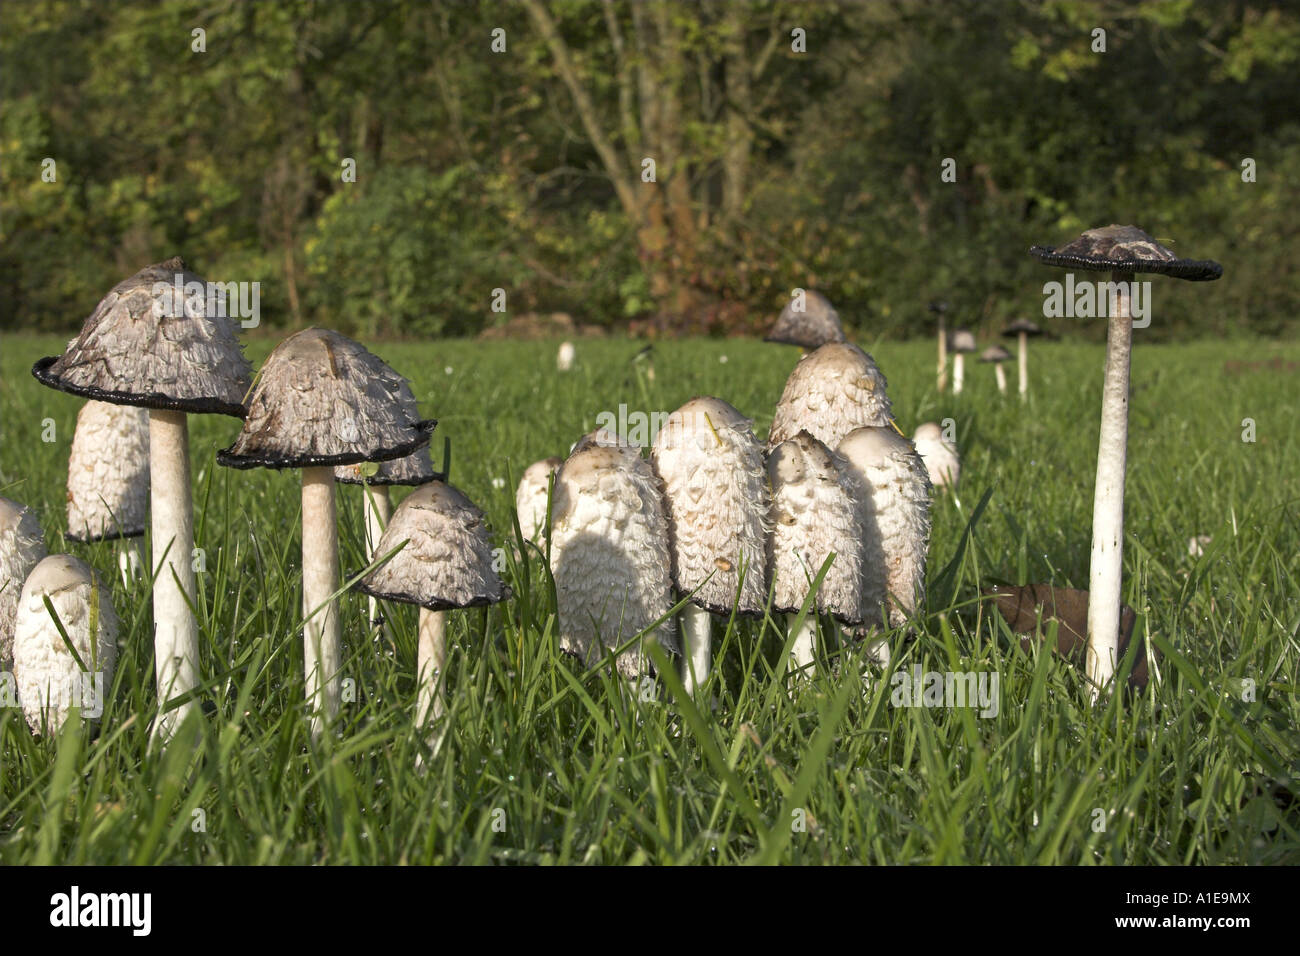 wig (Coprinus comatus), several individuals on a meadow Stock Photo